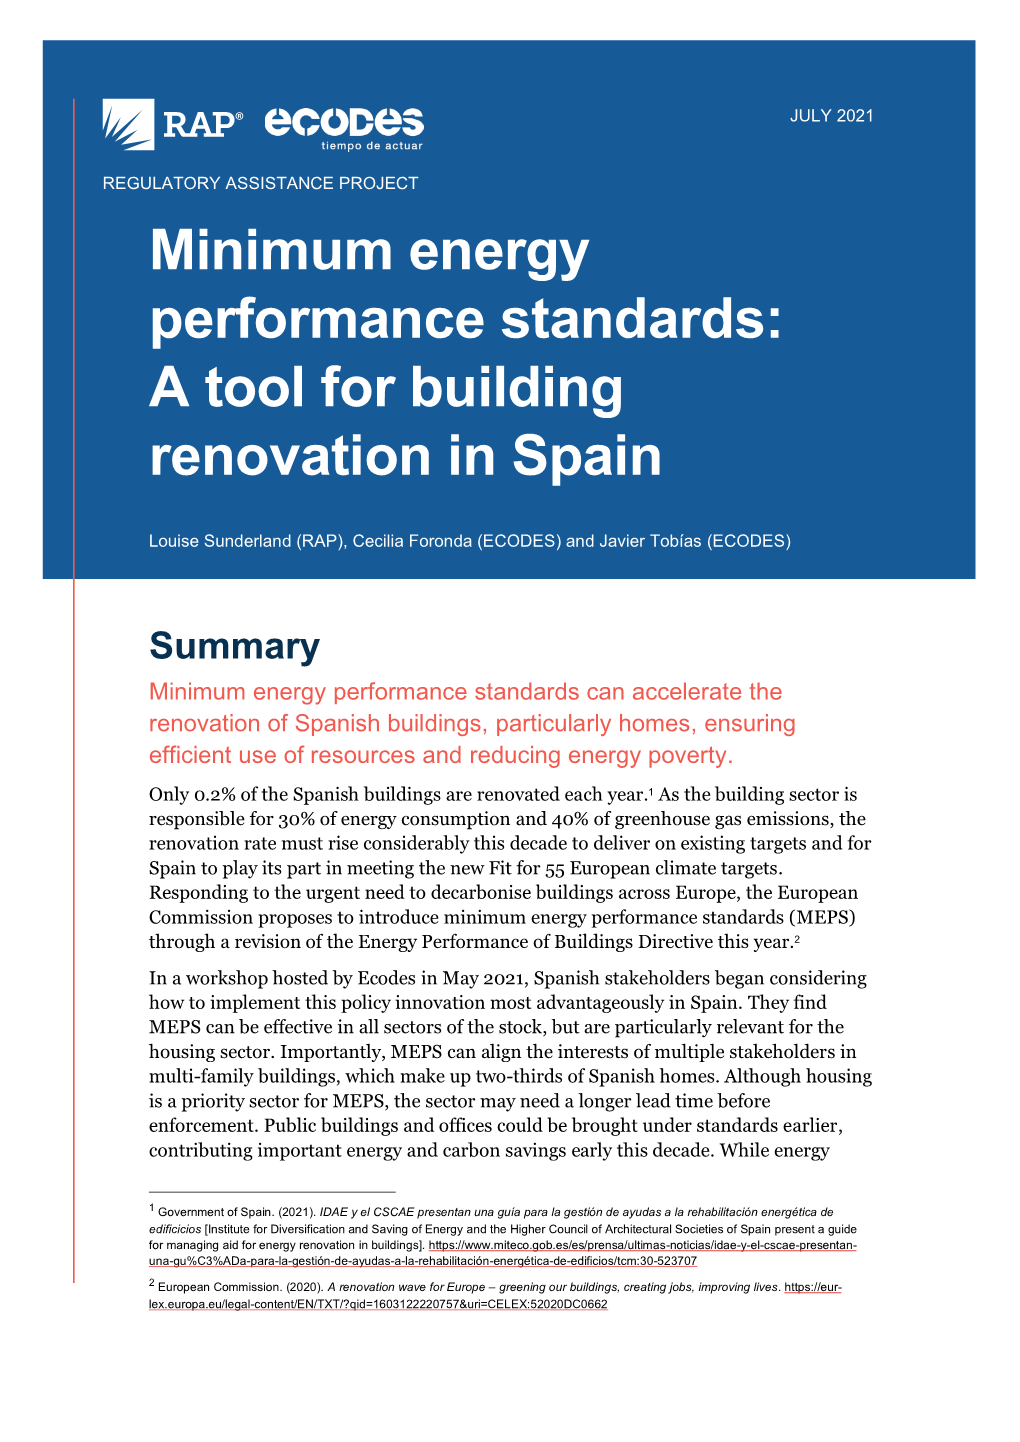 Minimum Energy Performance Standards: a Tool for Building Renovation in Spain